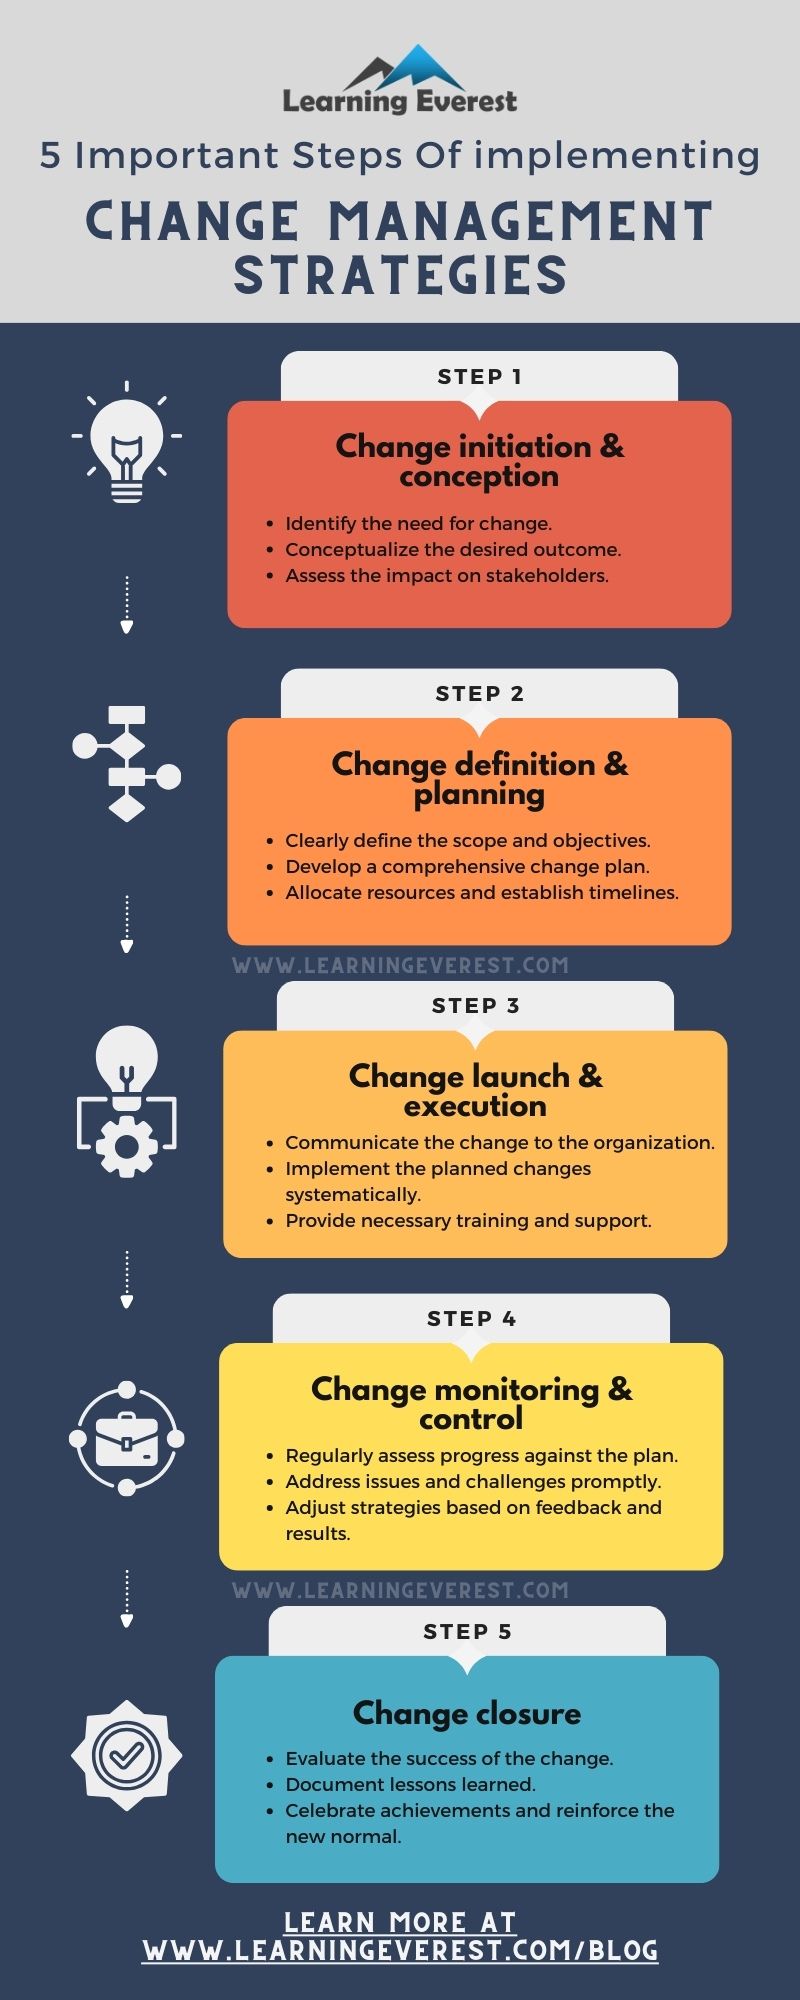 5 Important Steps of Implementing Change Management Strategies